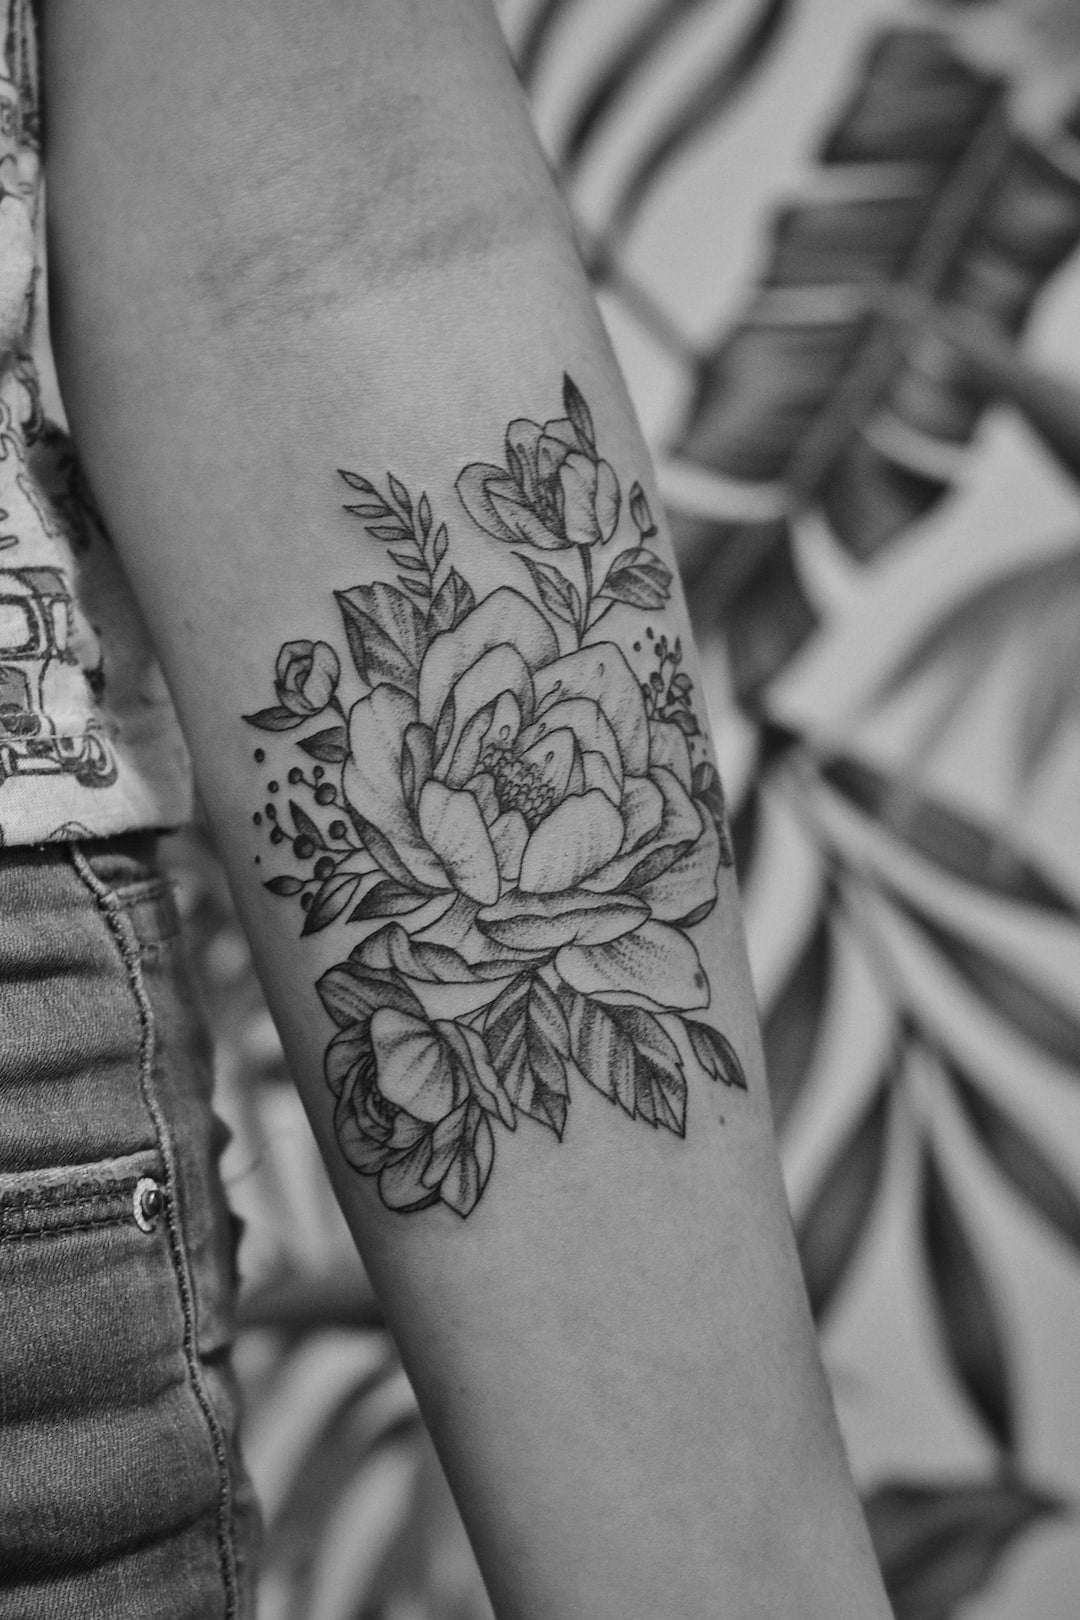 Tattoos and Self-Expression: Stories Behind the Ink